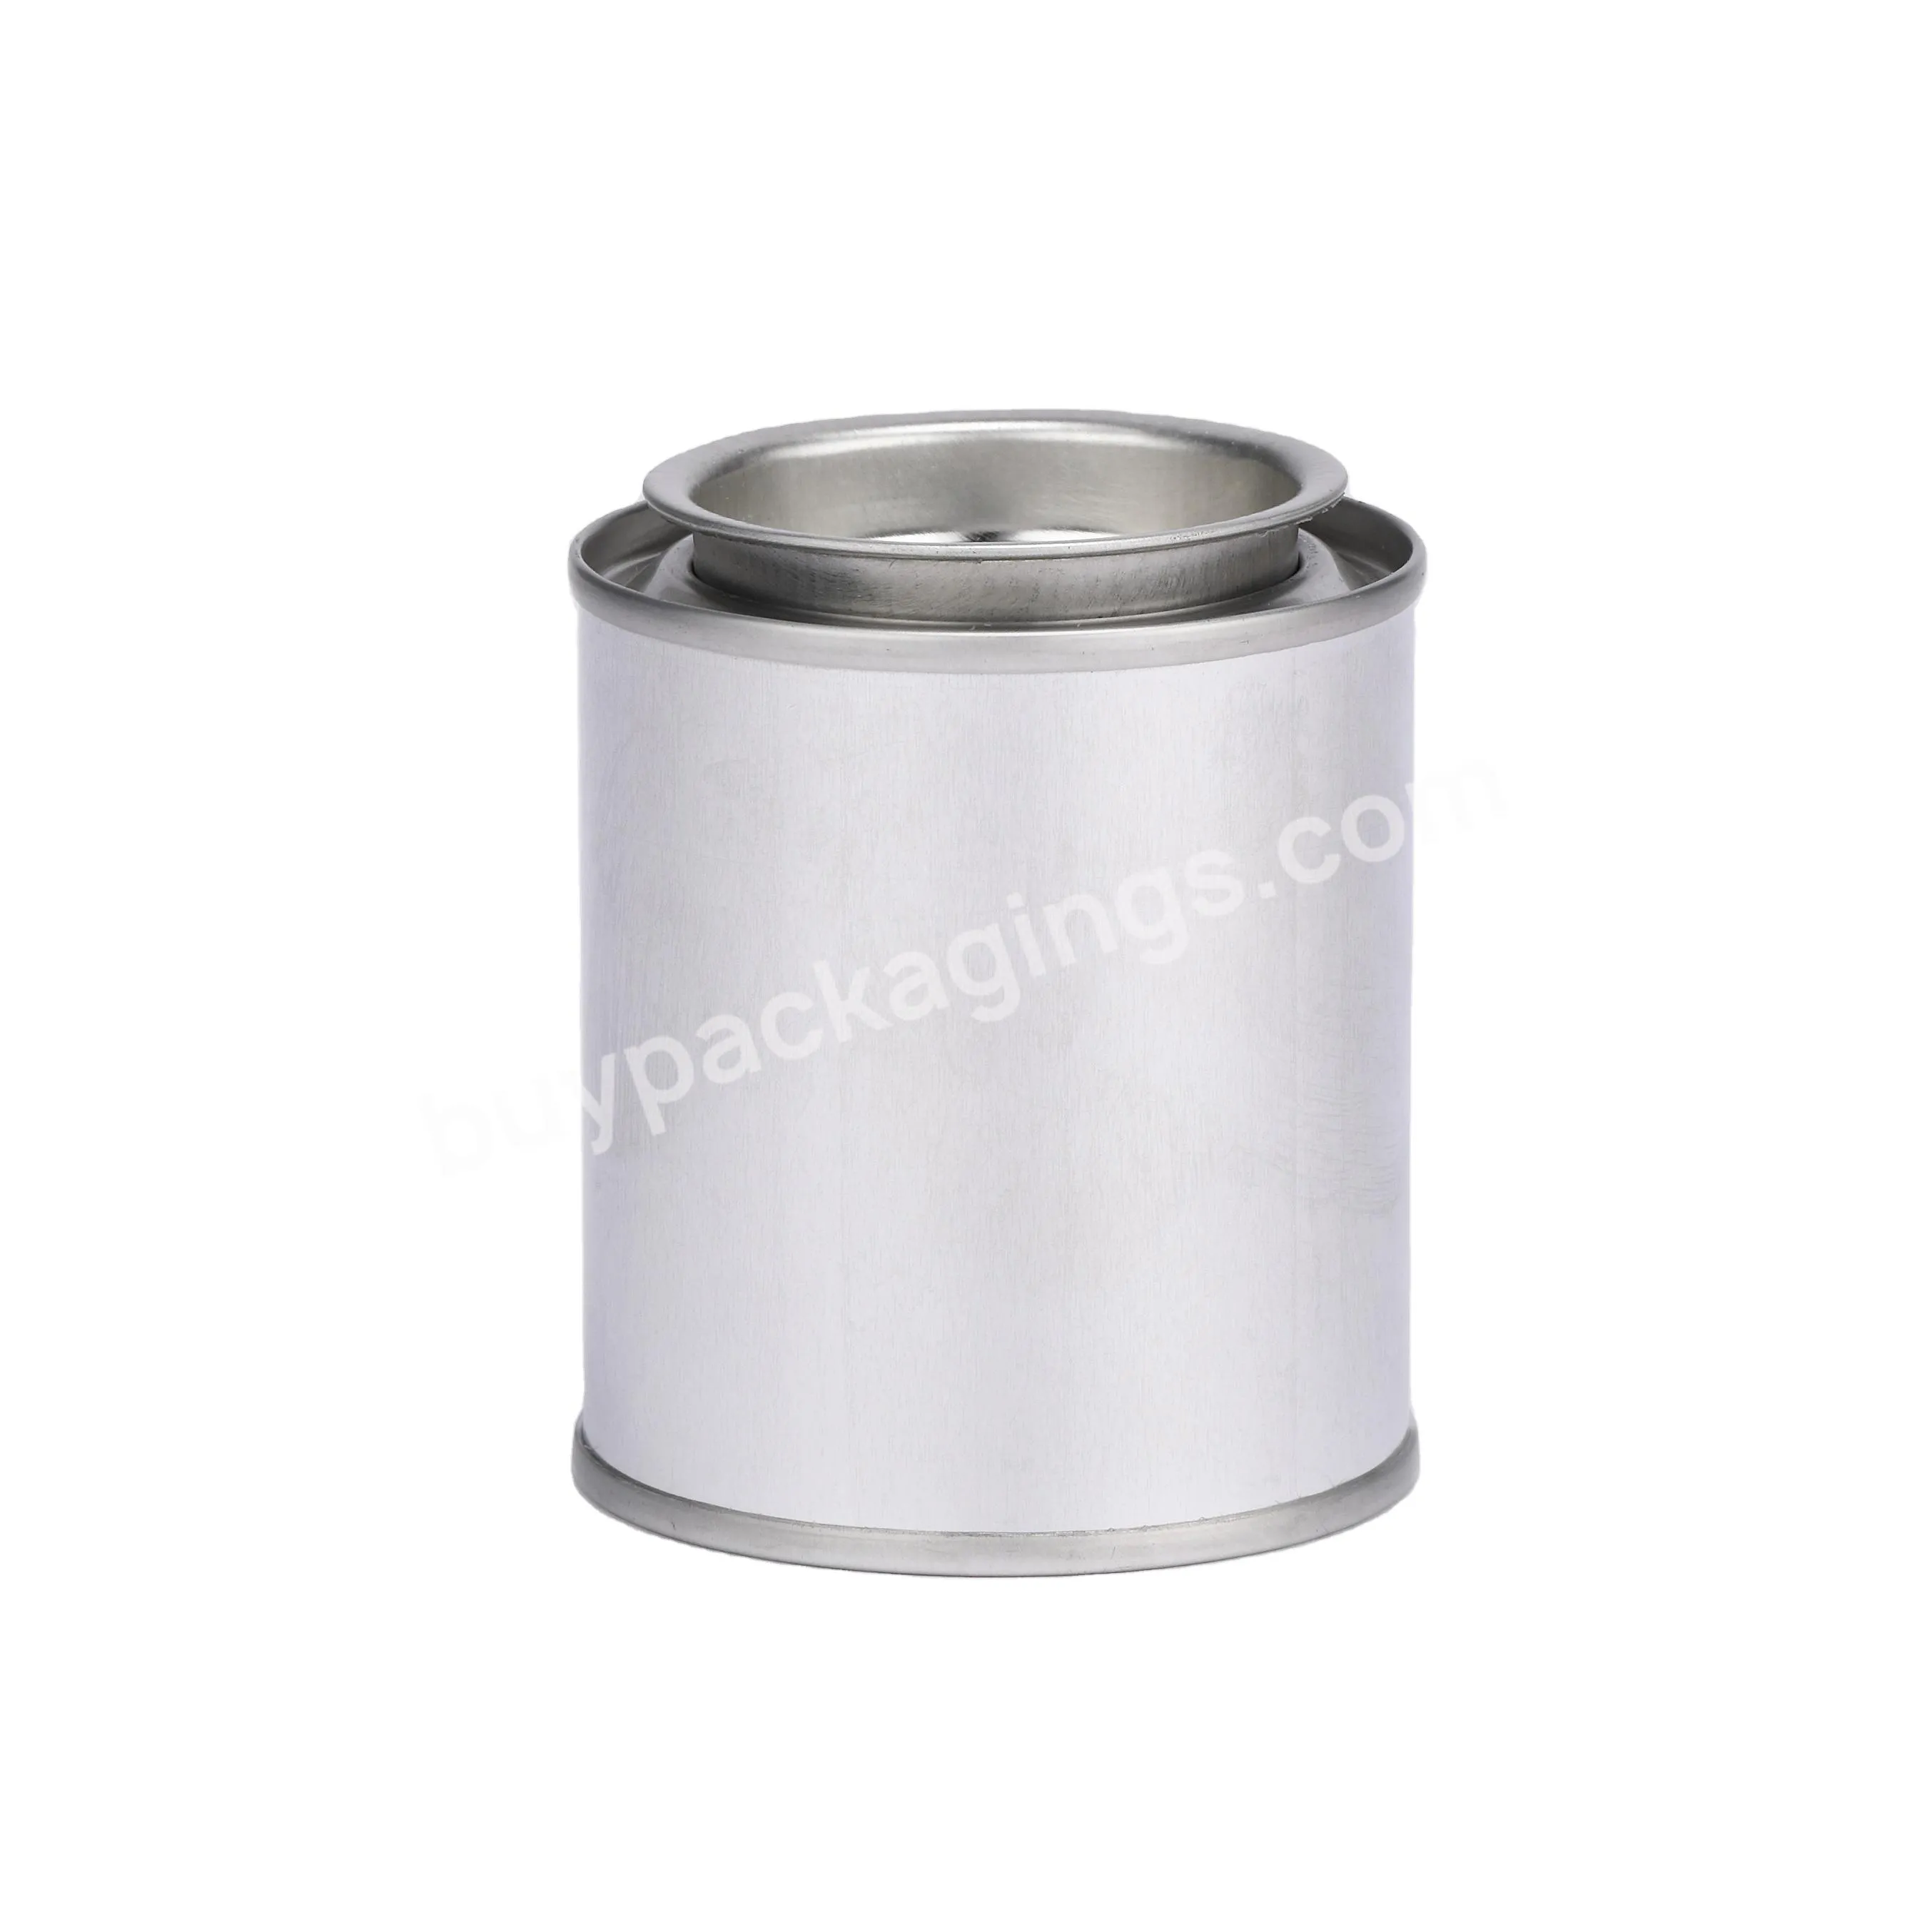 High Quality 0.1l Round Metal Tin Can With Lever Lid For Paint Packaging Or Other